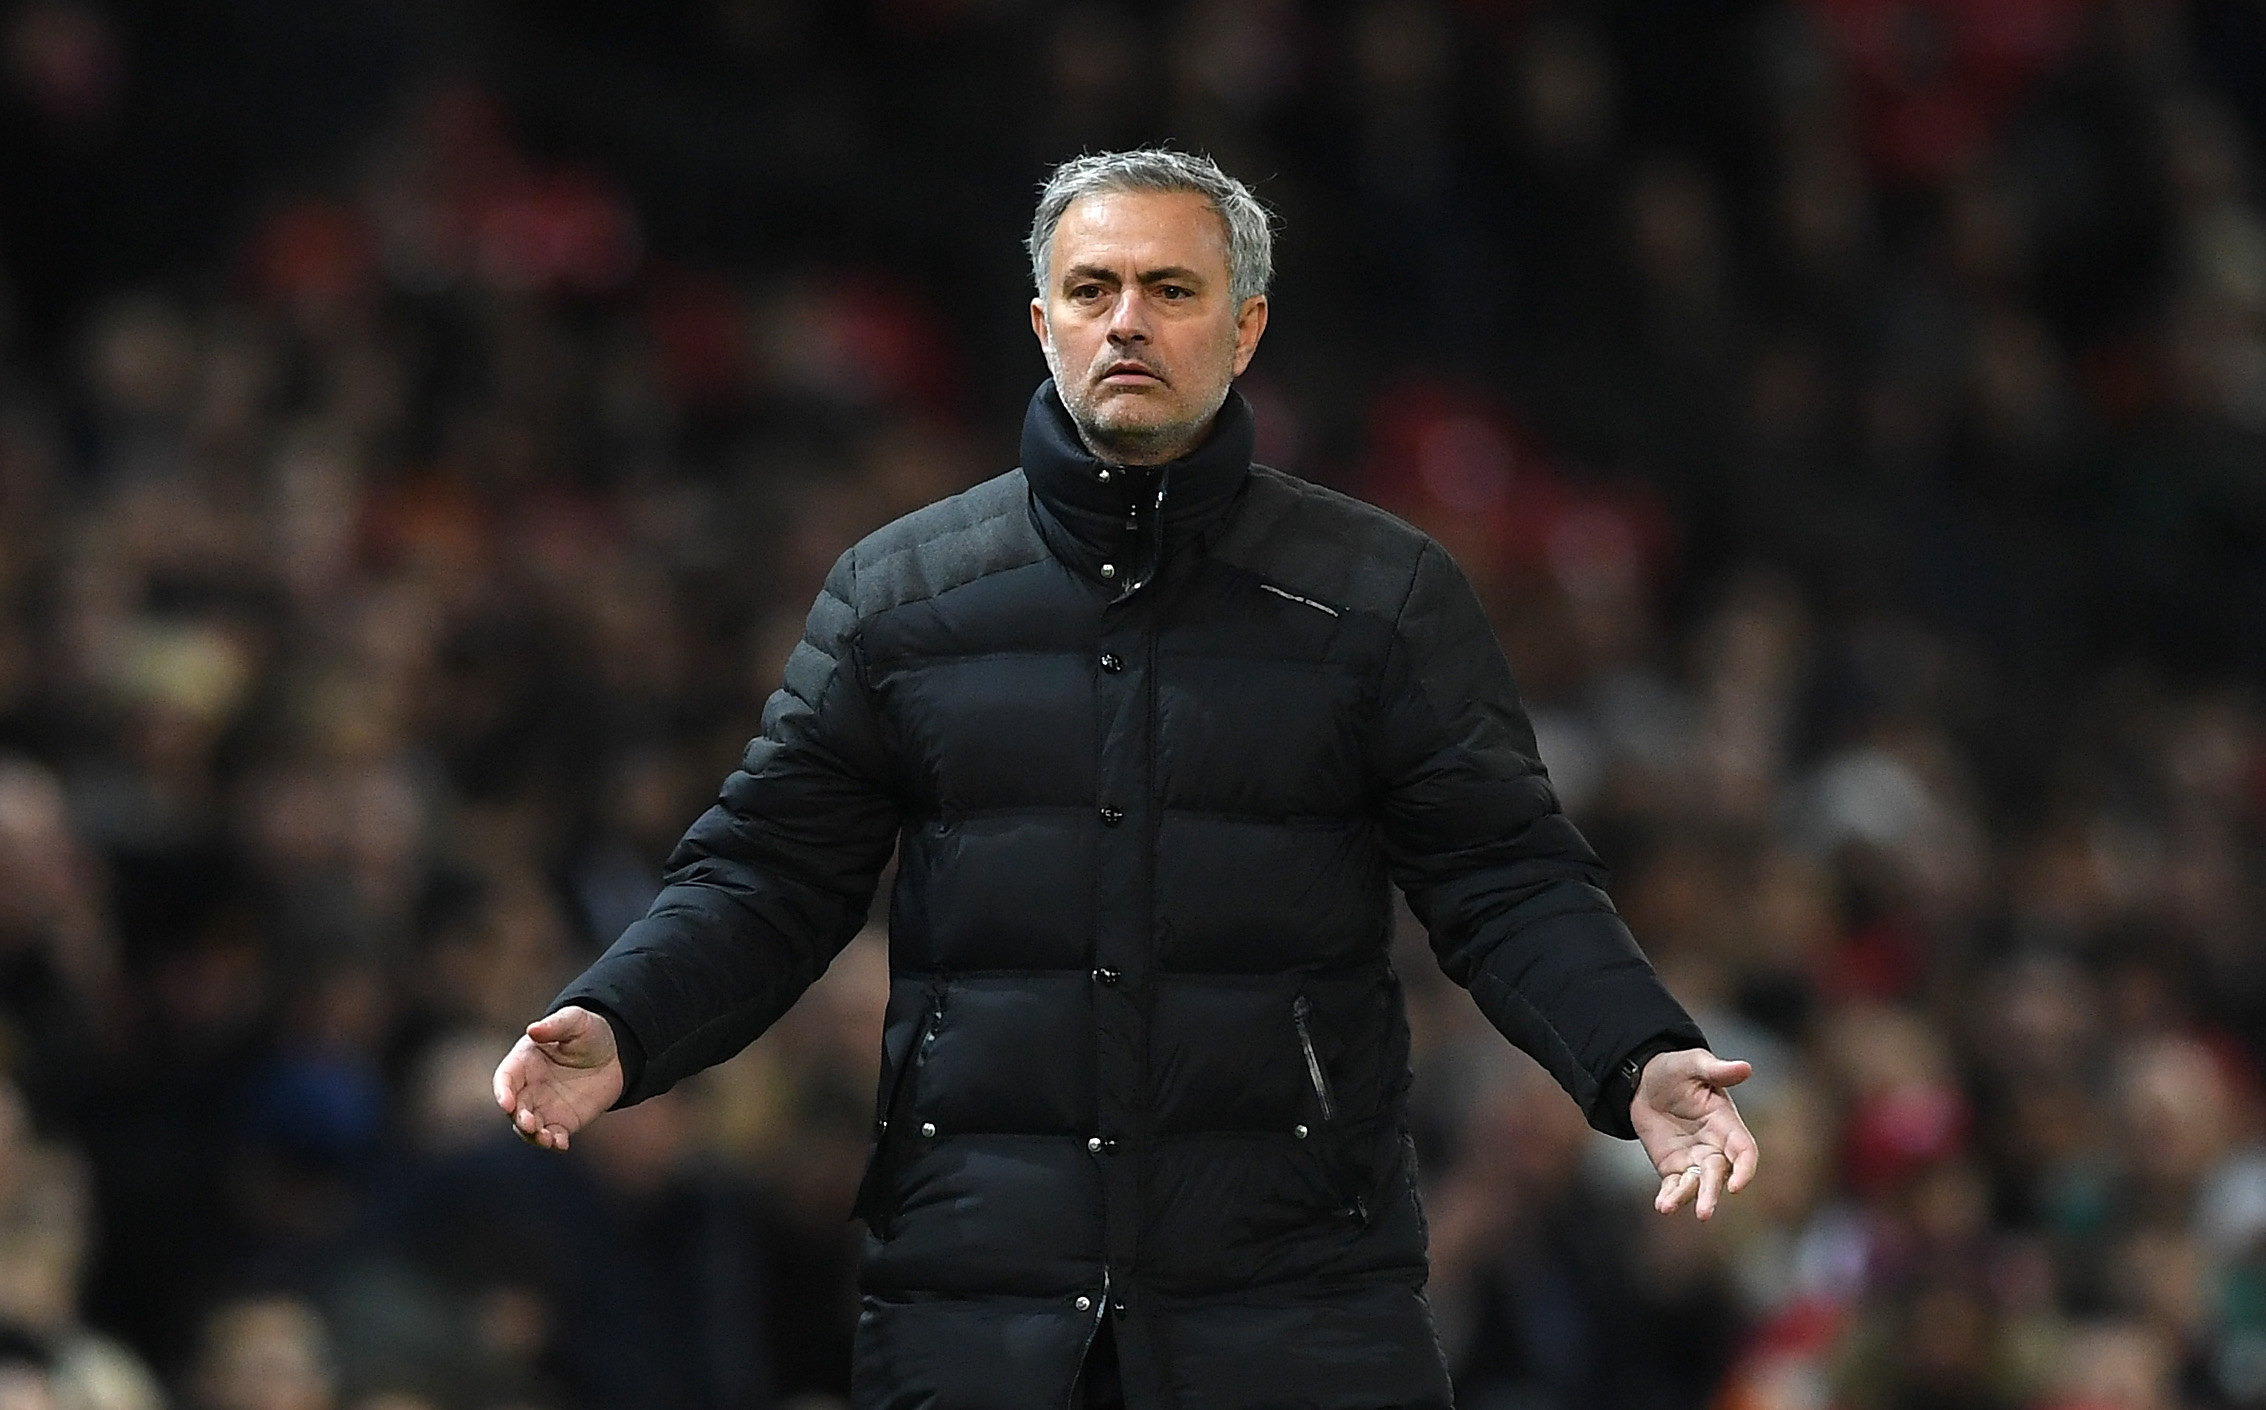 MANCHESTER, ENGLAND - JANUARY 10:  Jose Mourinho, Manager of Manchester United reacts during the EFL Cup Semi-Final First Leg match between Manchester United and Hull City at Old Trafford on January 10, 2017 in Manchester, England.  (Photo by Shaun Botterill/Getty Images)